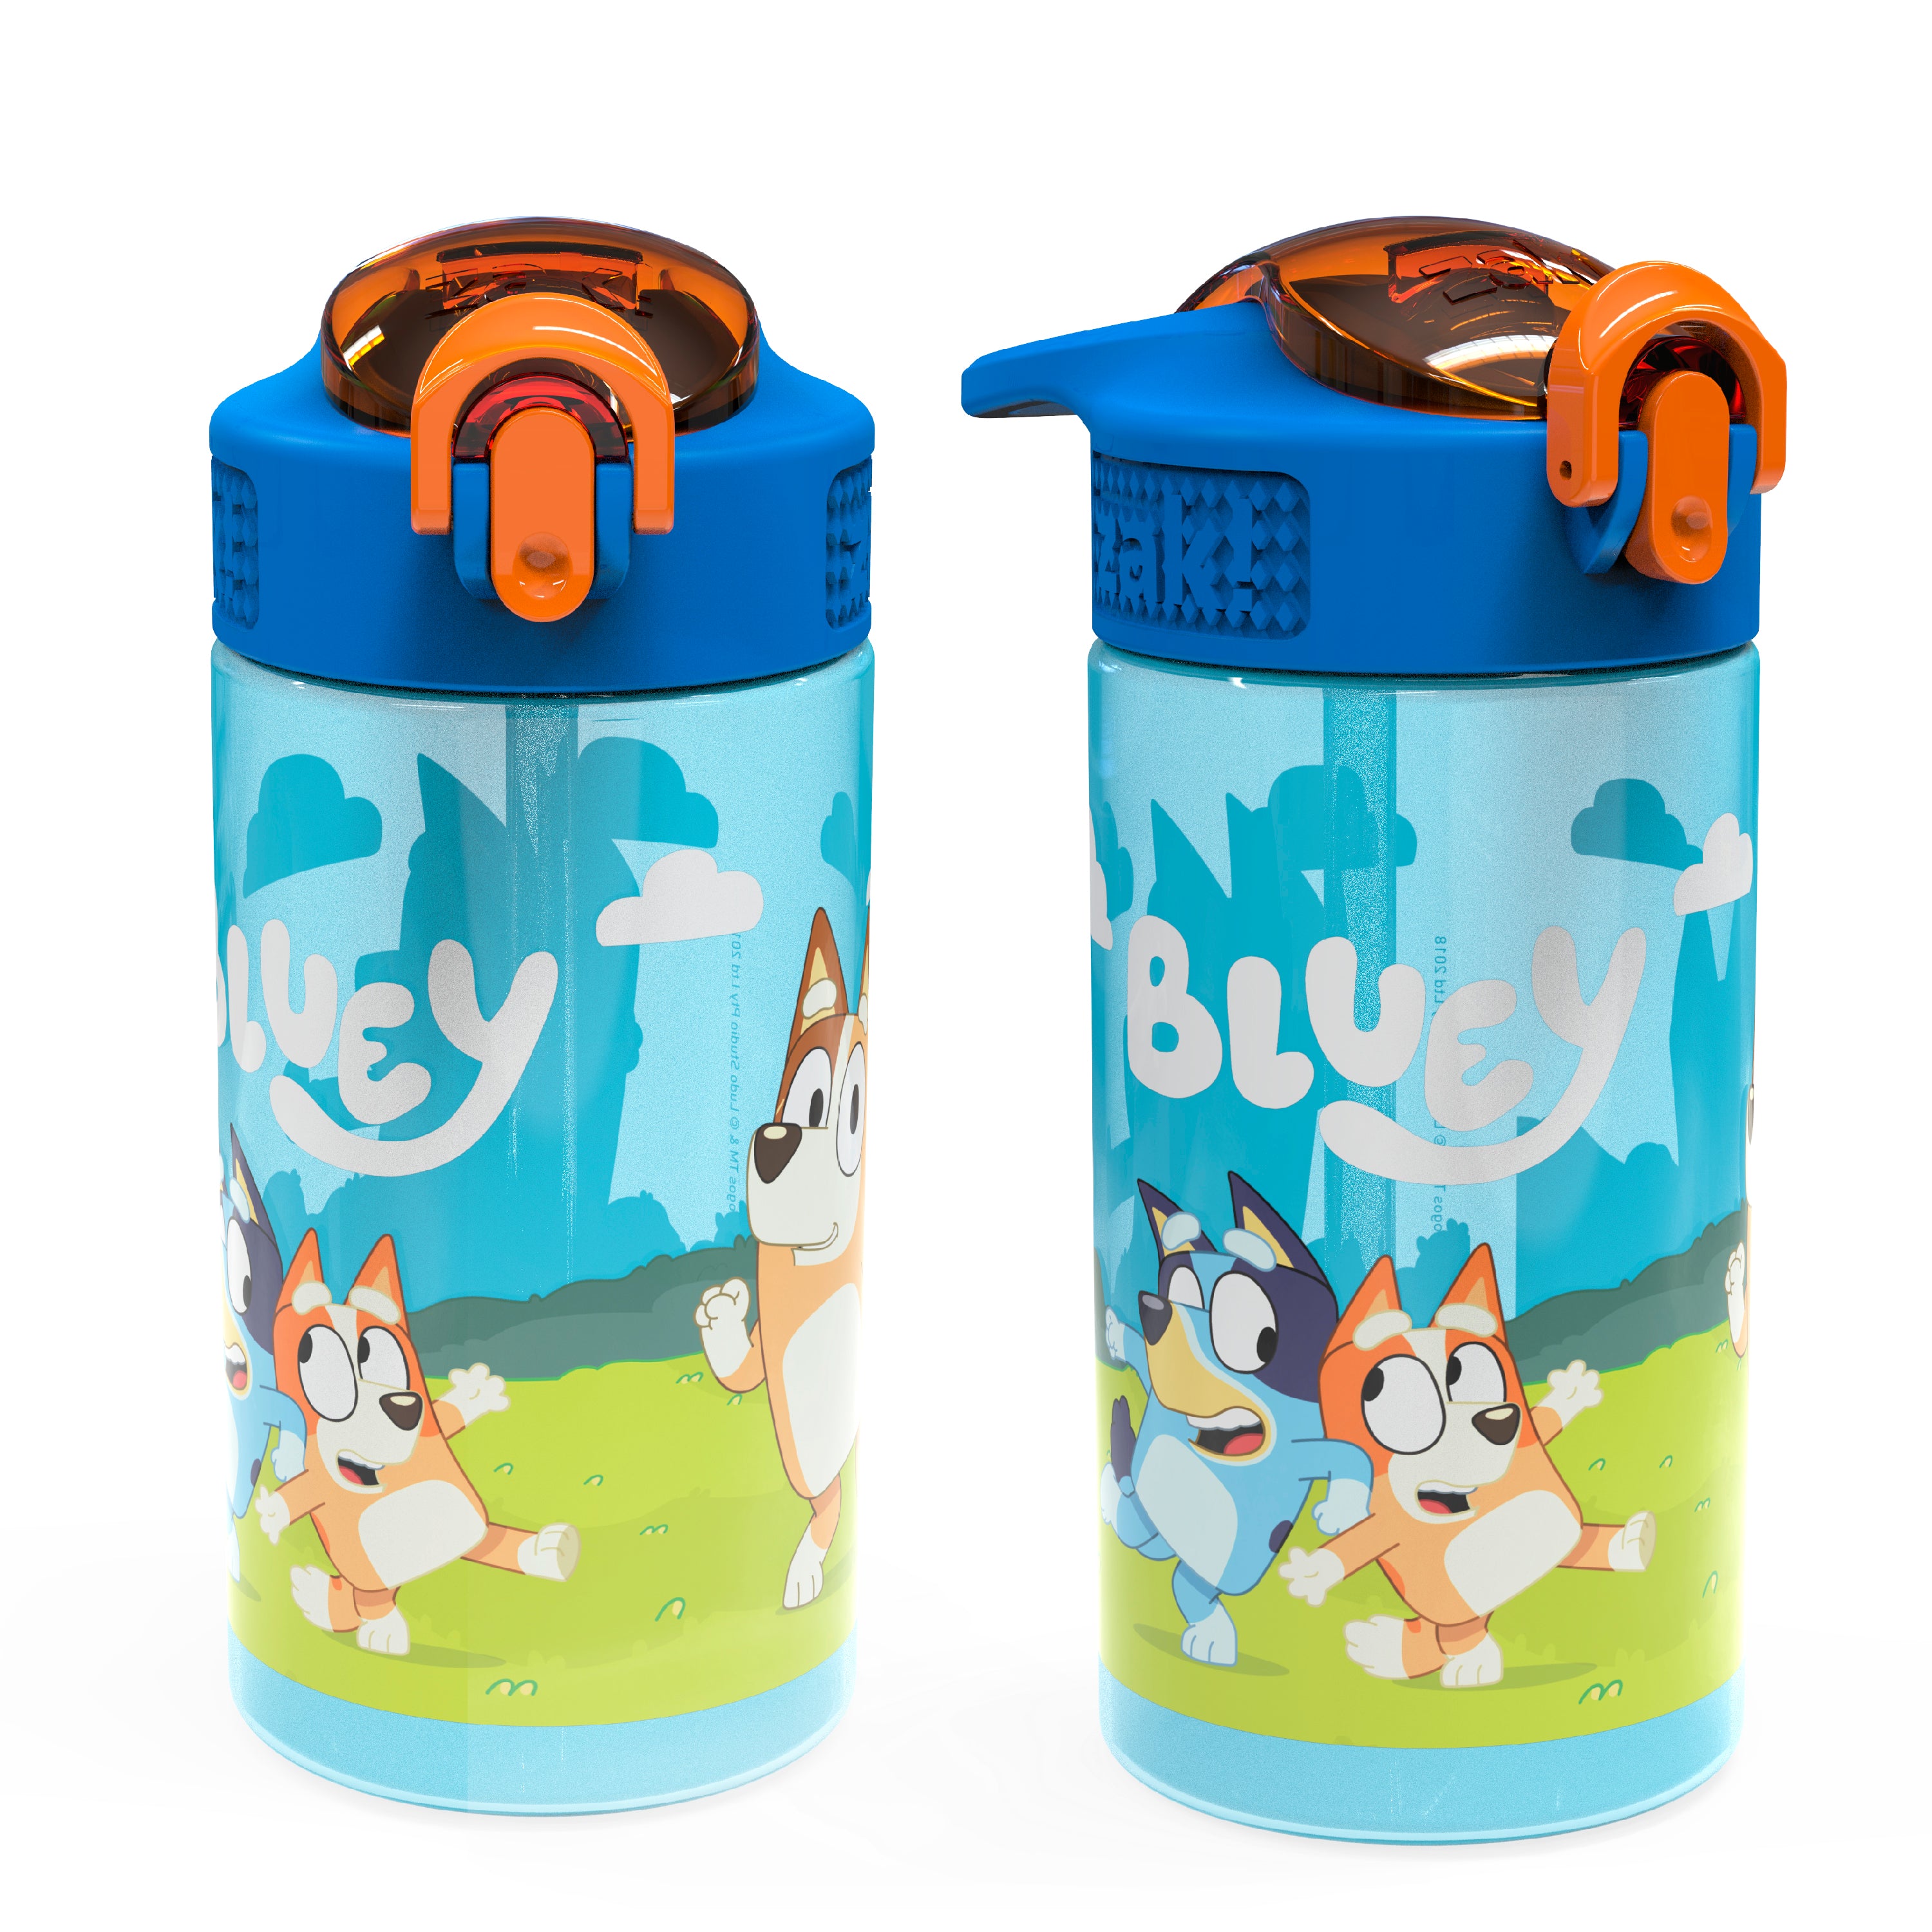 Bluey Kids Plastic Water Bottle with Leak Proof Lid and Spout - 2 Pack, 16 ounce